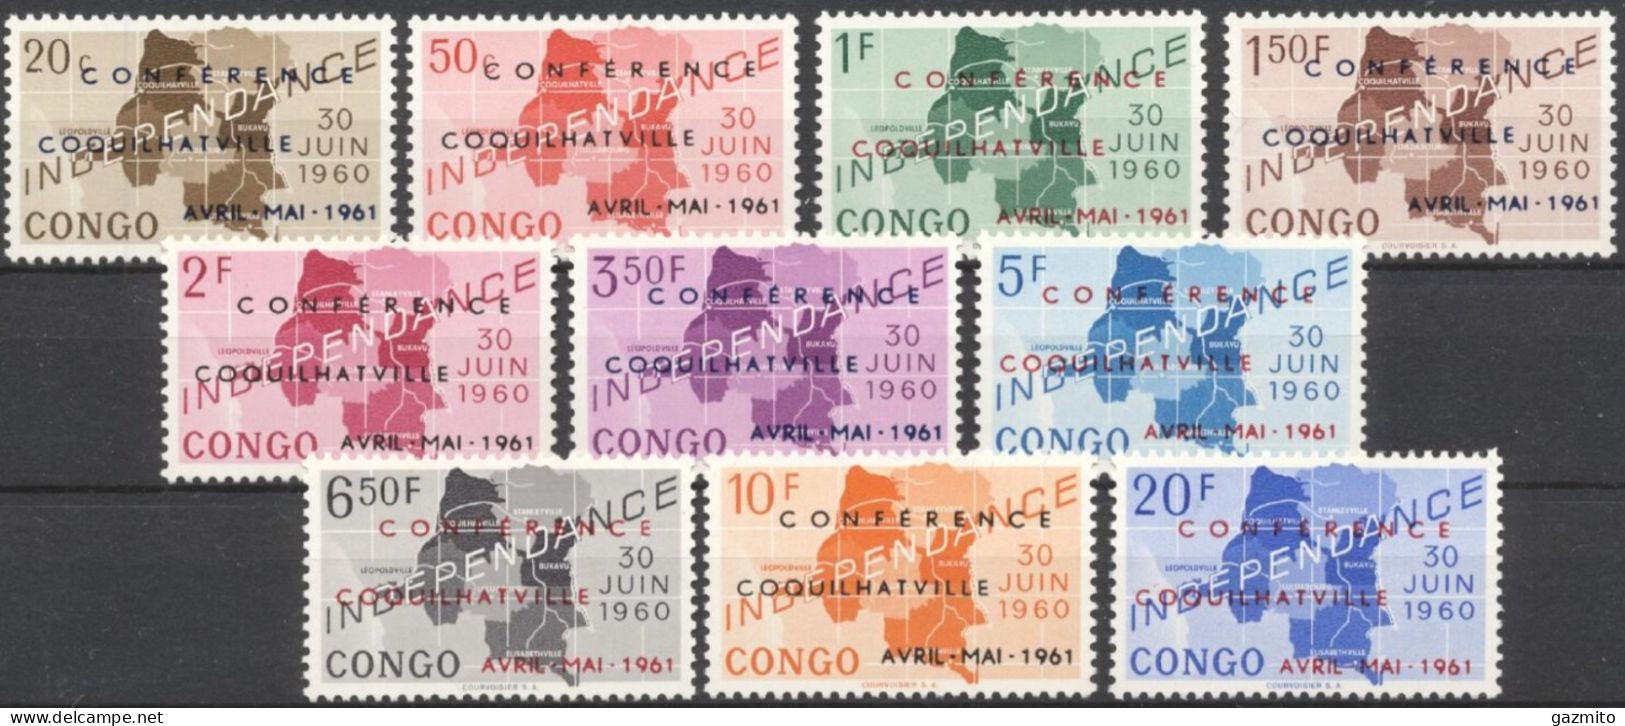 Congo Ex Zaire 1961, Coquilhatville Conference - Overprinted CONFERENCE COQUILHATVILLE AVRIL-MAI-1961, 10val - Geographie